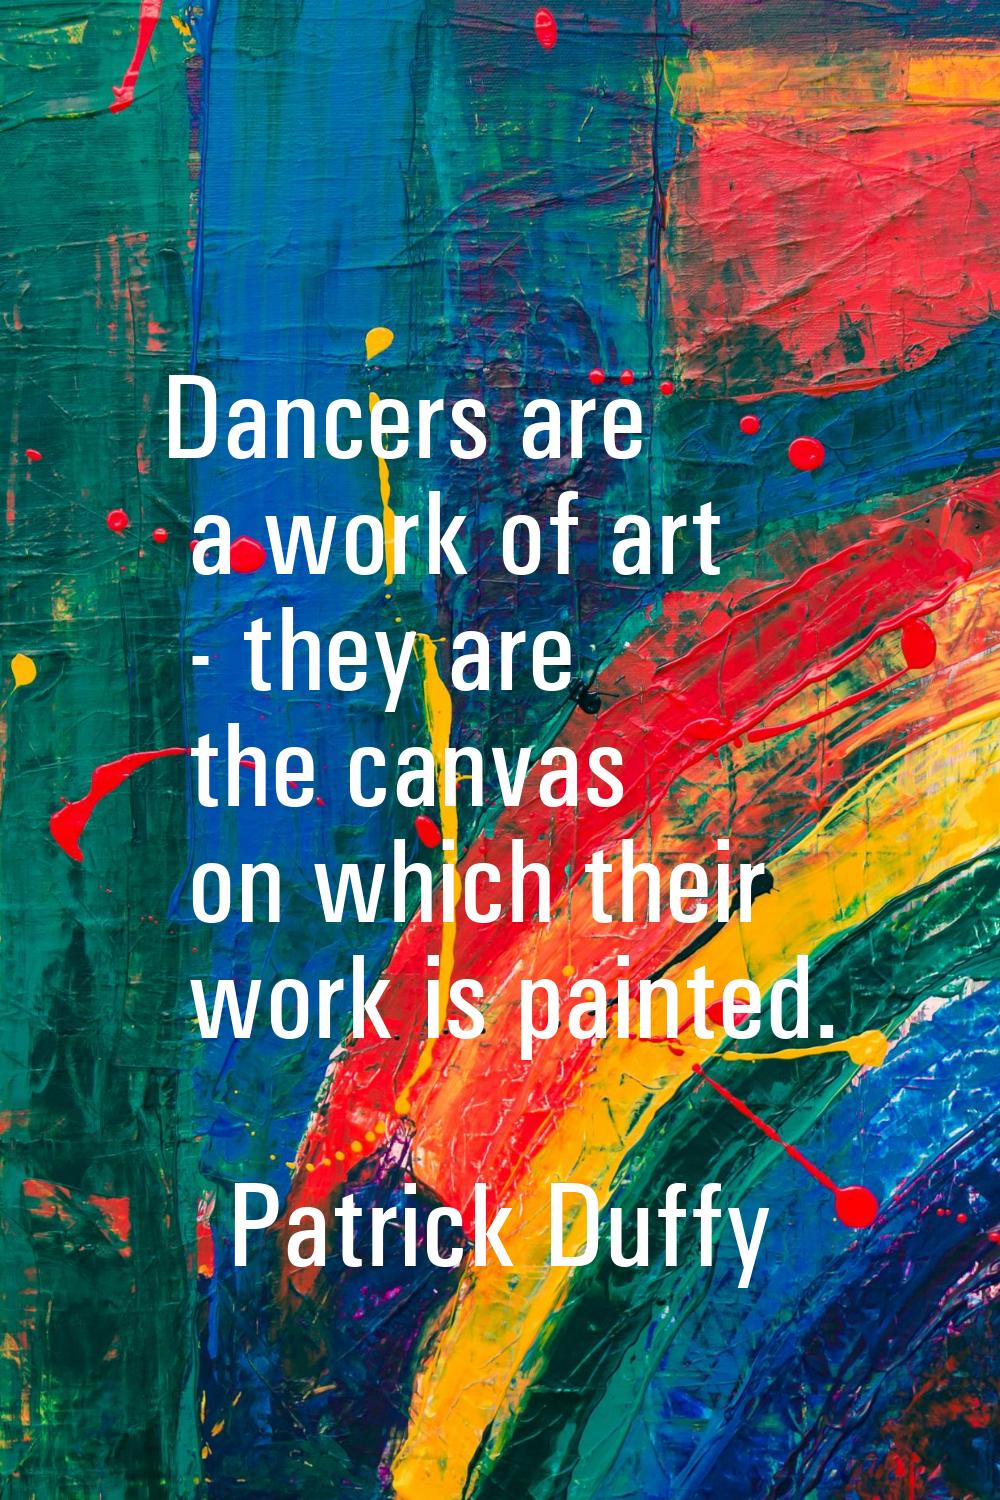 Dancers are a work of art - they are the canvas on which their work is painted.